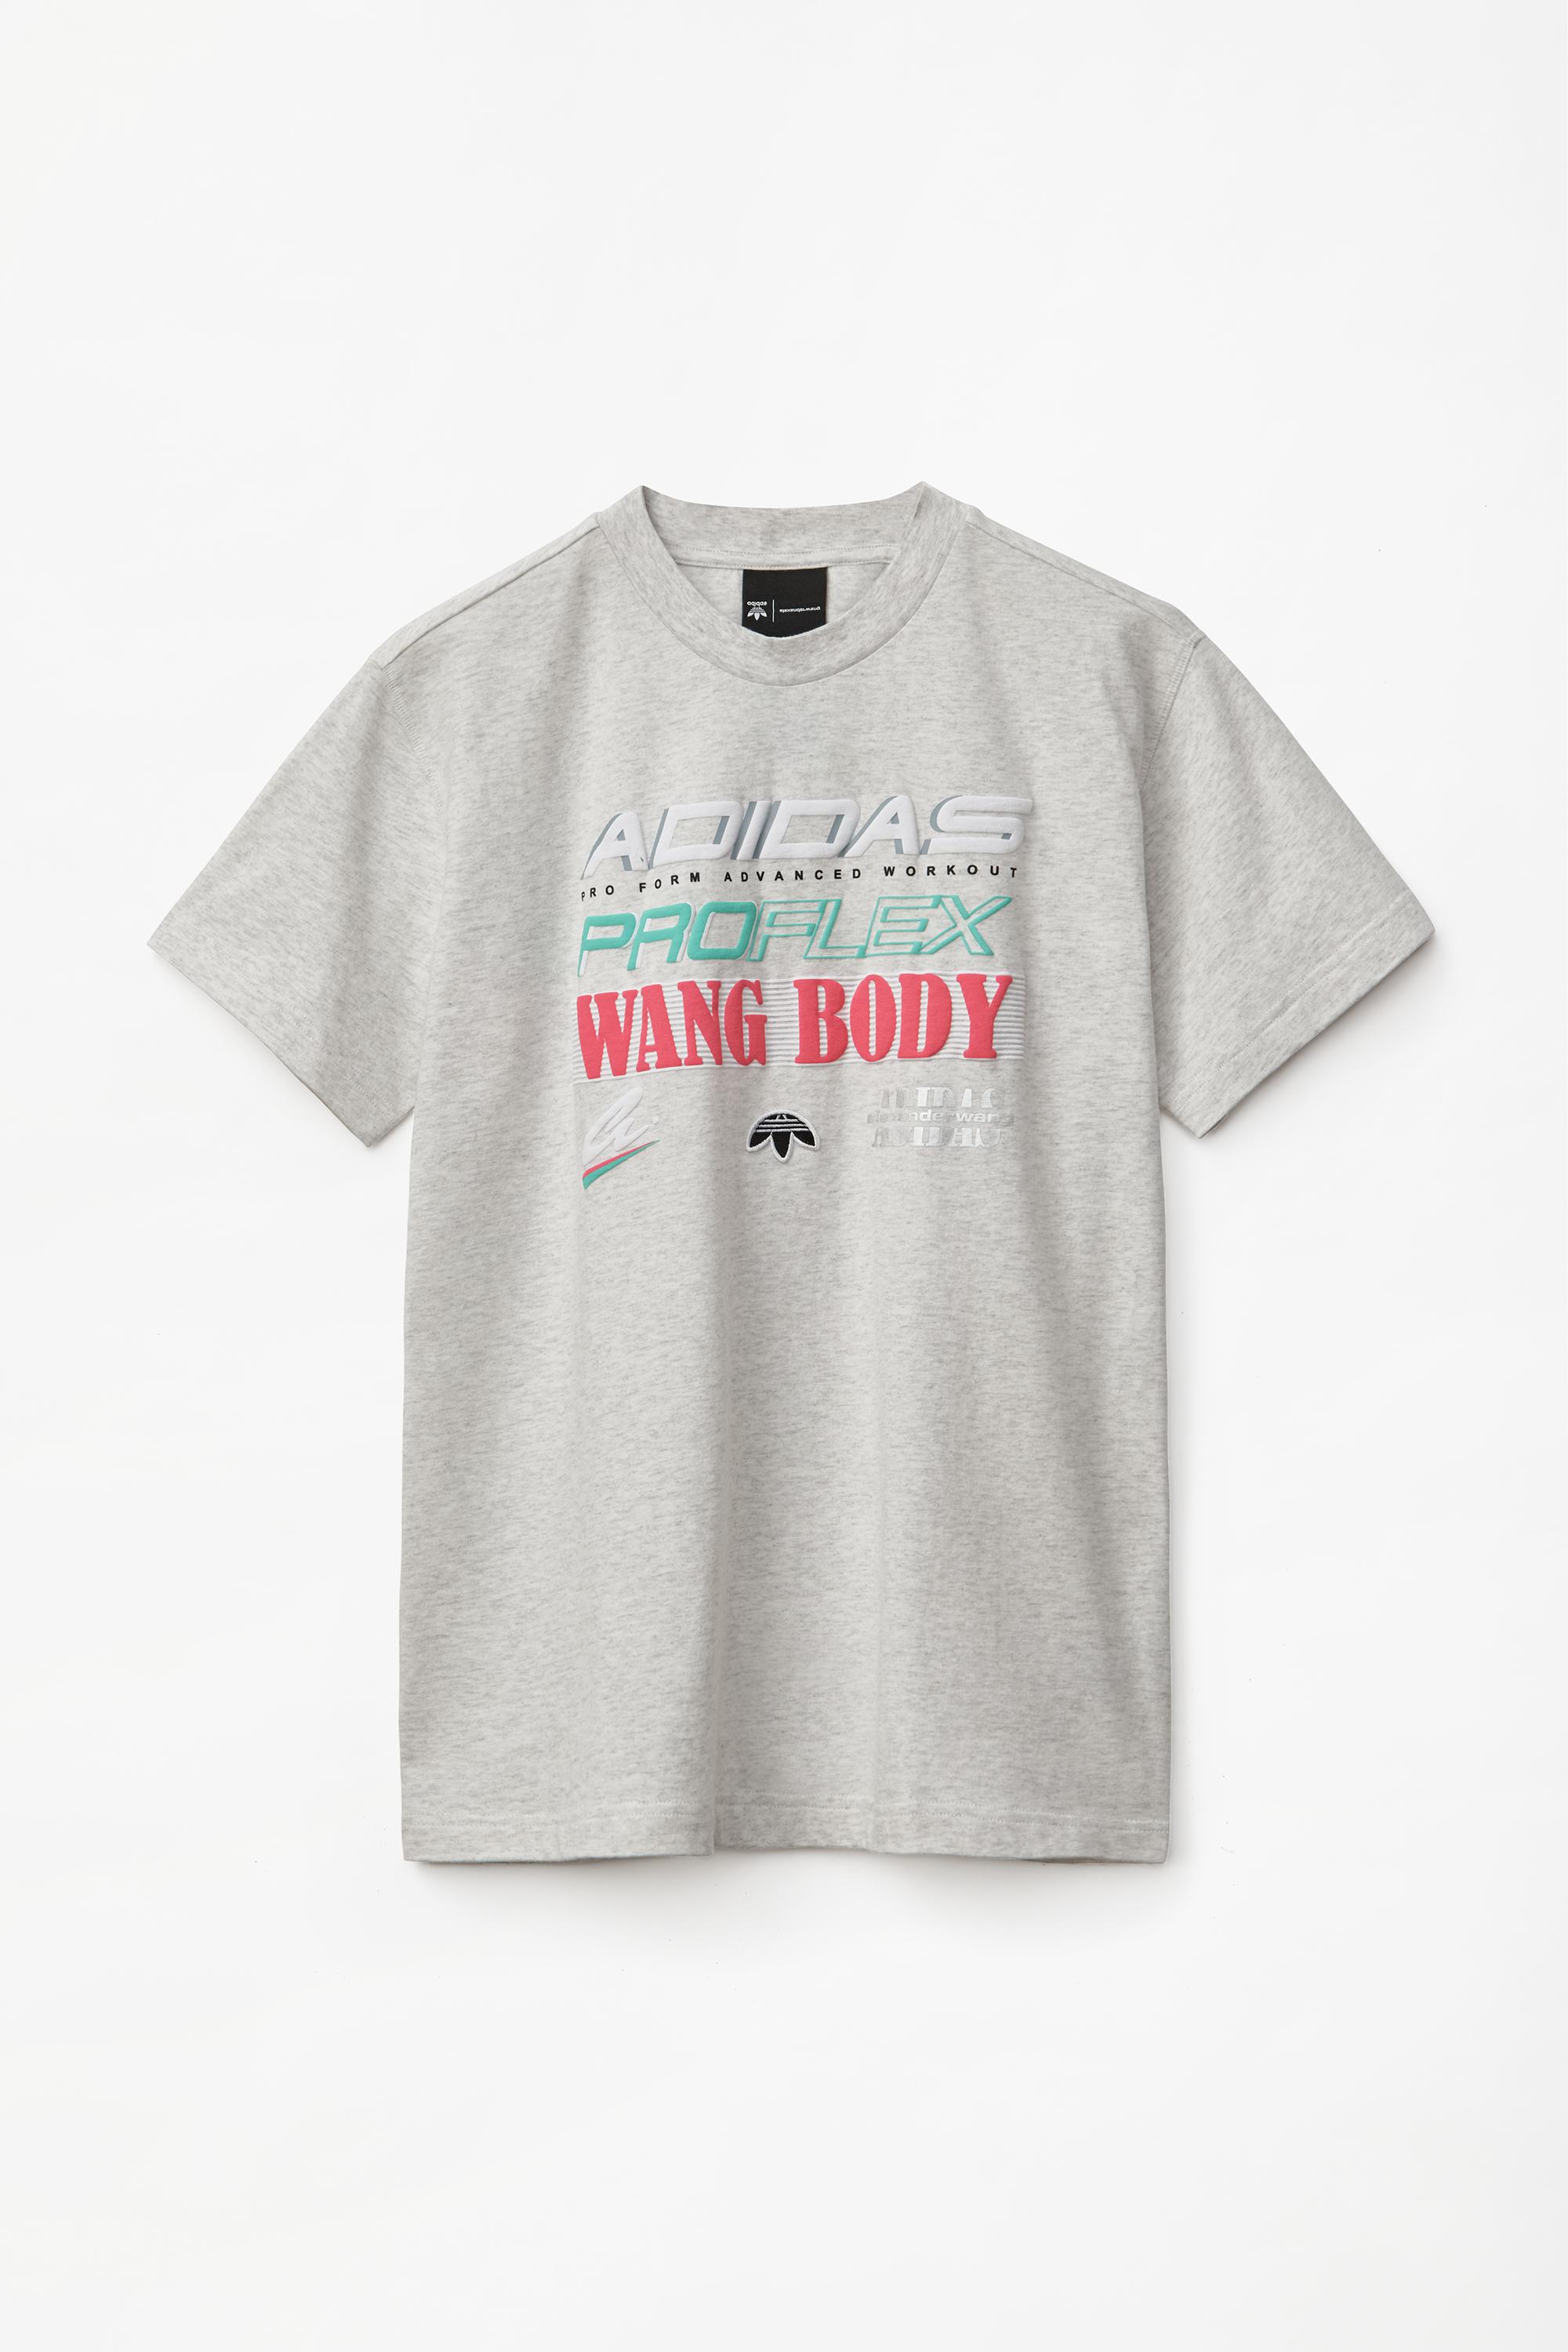 adidas originals by aw graphic tee